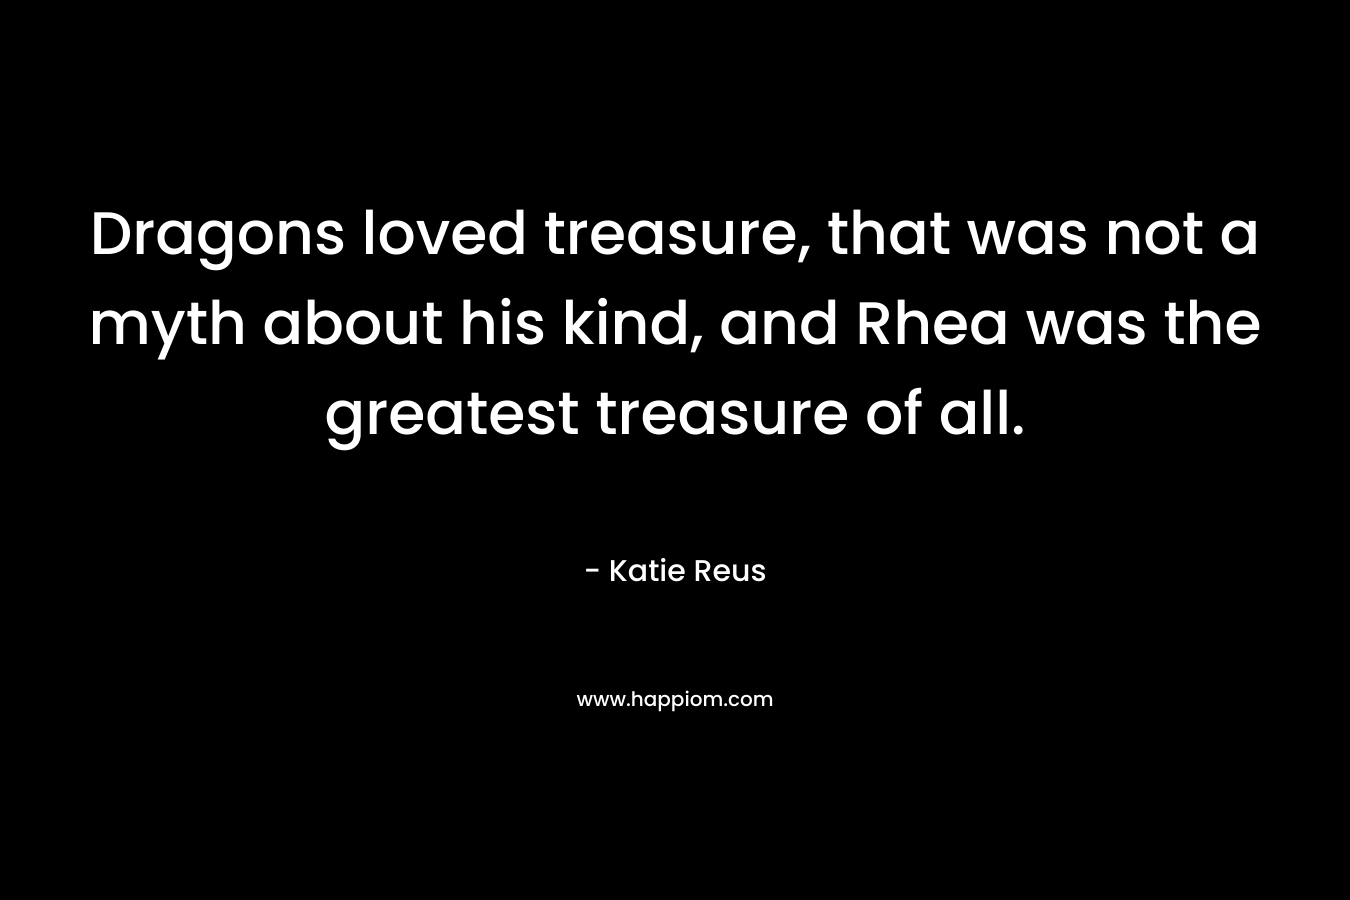 Dragons loved treasure, that was not a myth about his kind, and Rhea was the greatest treasure of all.